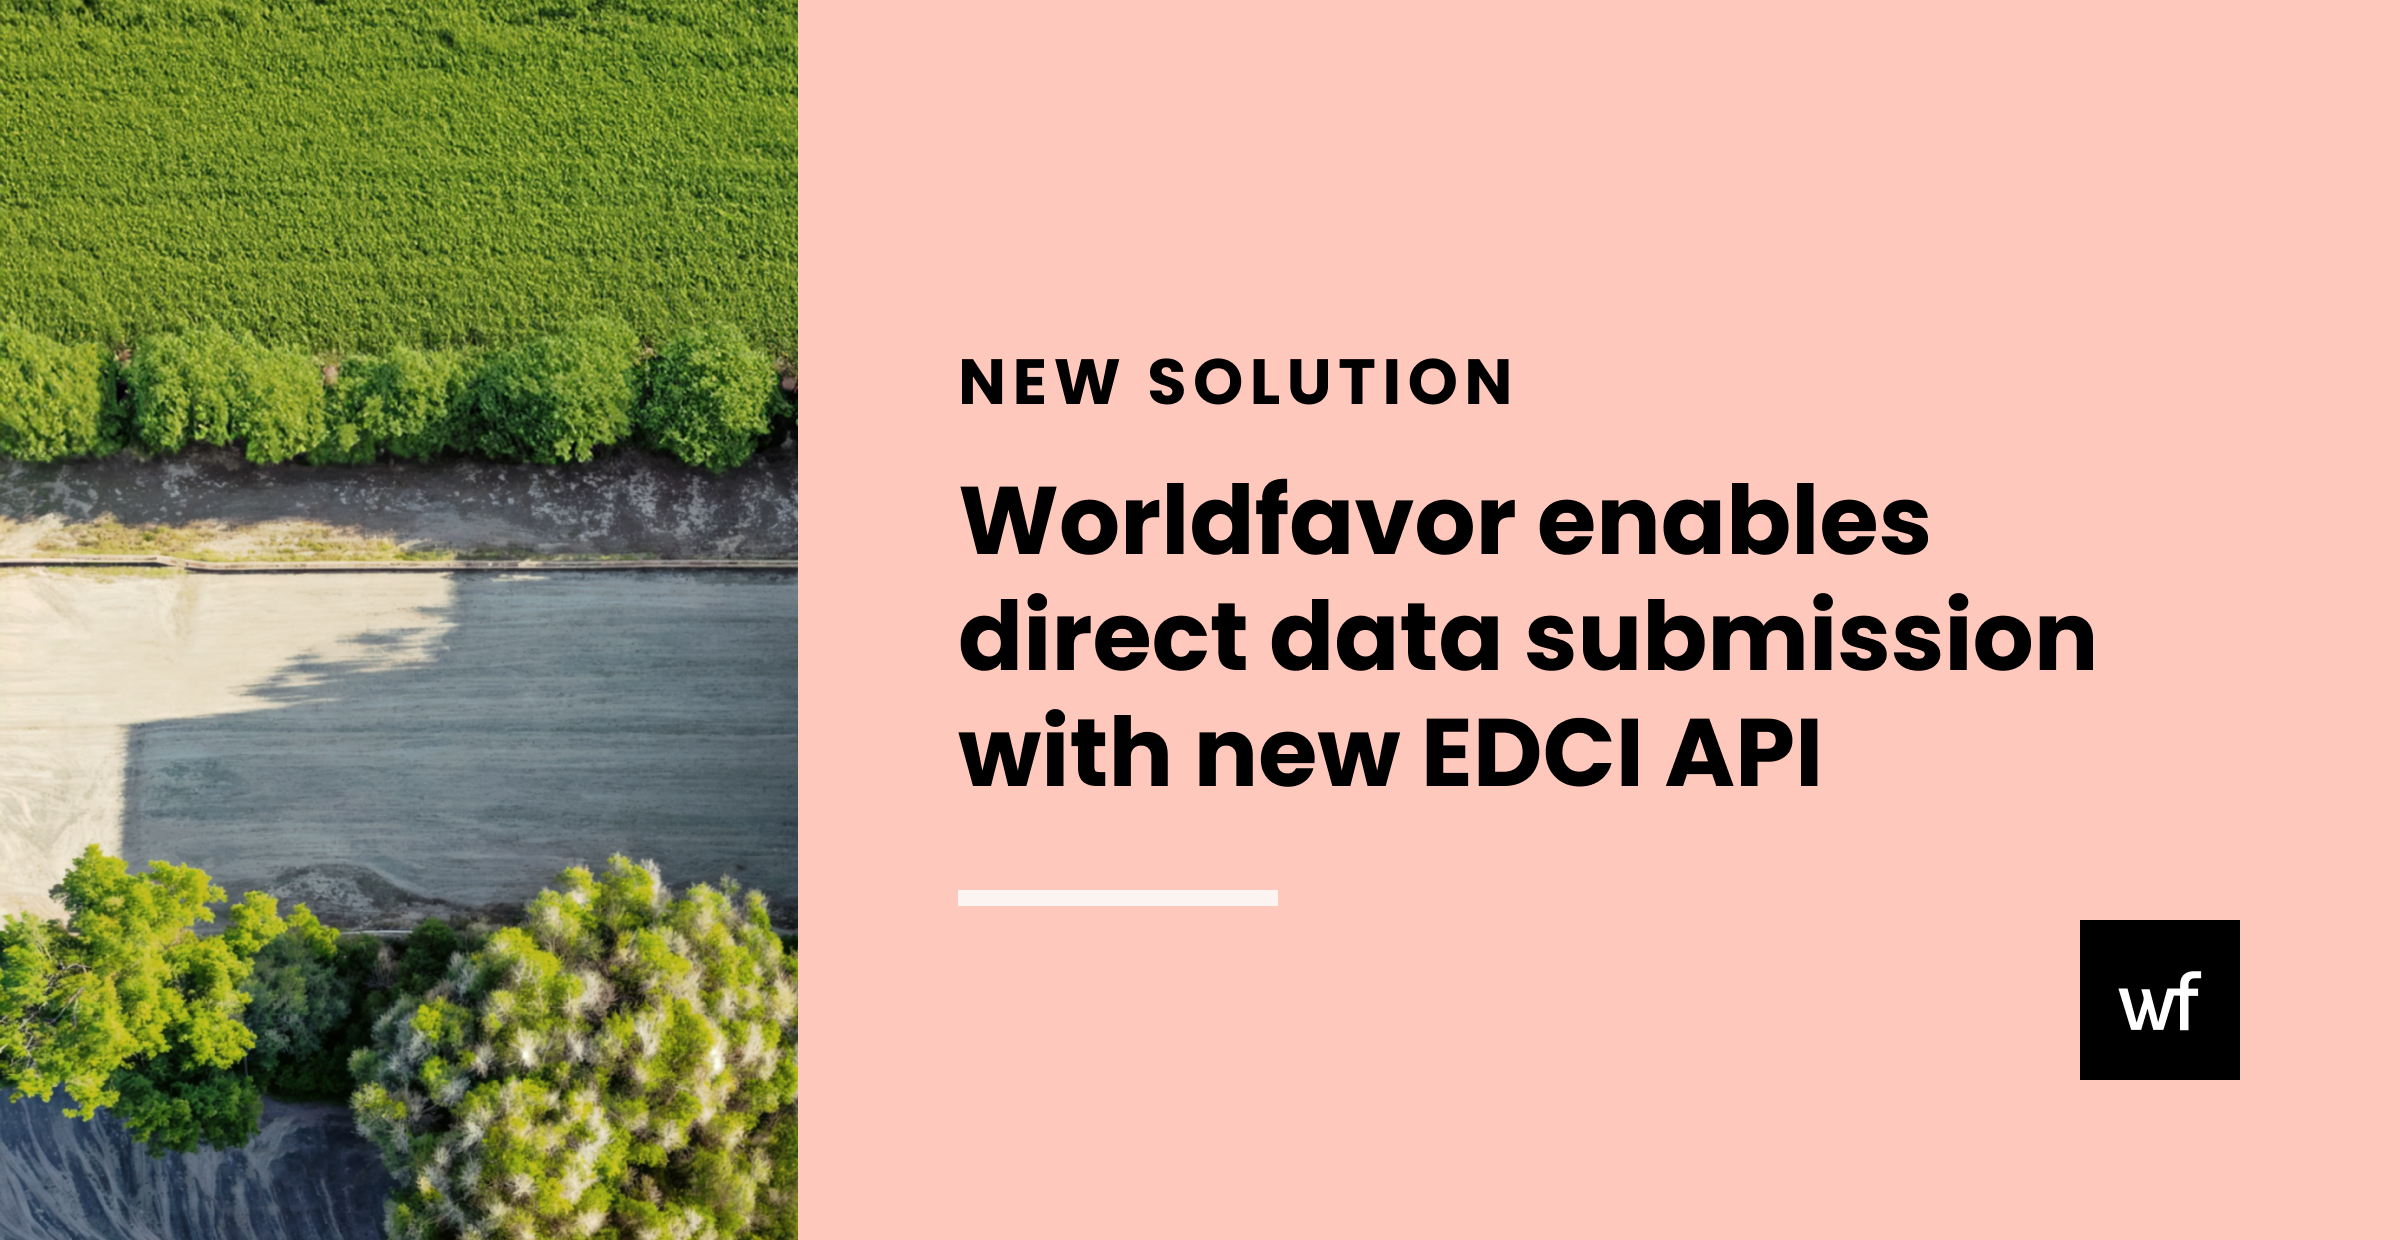 Worldfavor enables direct data submission with new EDCI API